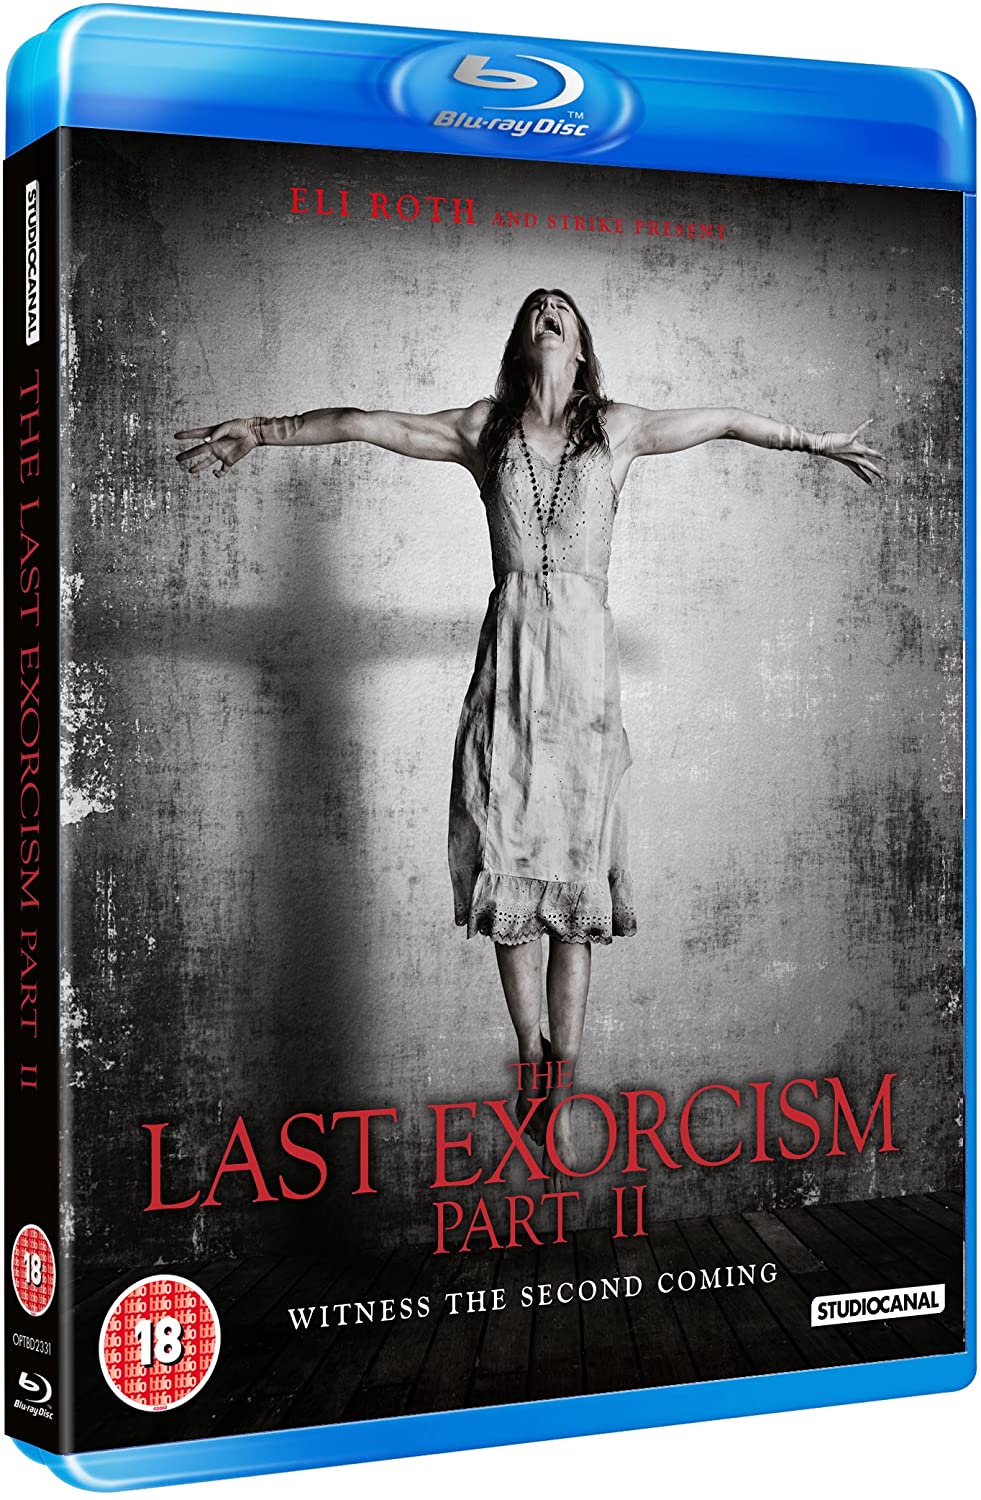 Ultimo esorcismo: parte II - Extreme Uncut Edition [Blu-ray] [2013]